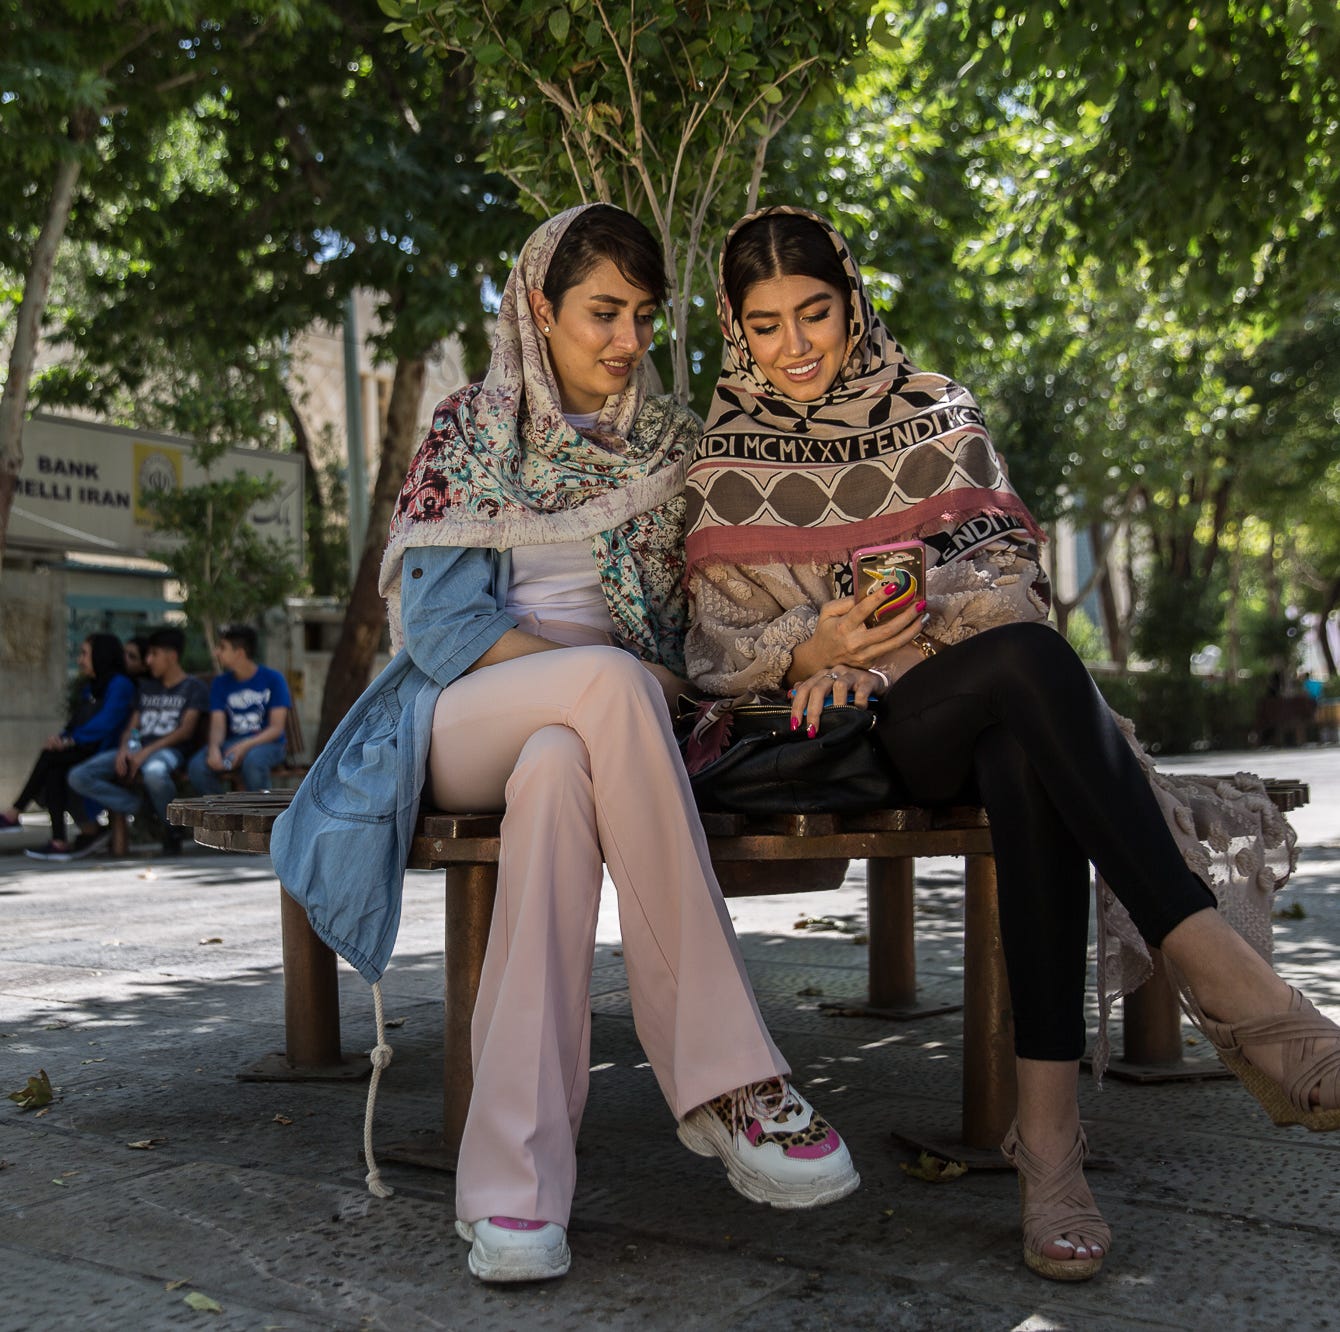 Kimia Naderzadeh, right, and her cousin, Maryam Dehnavi, sit in the shade on a pedestrian street in Isfahan, Iran, on July 13, 2018.